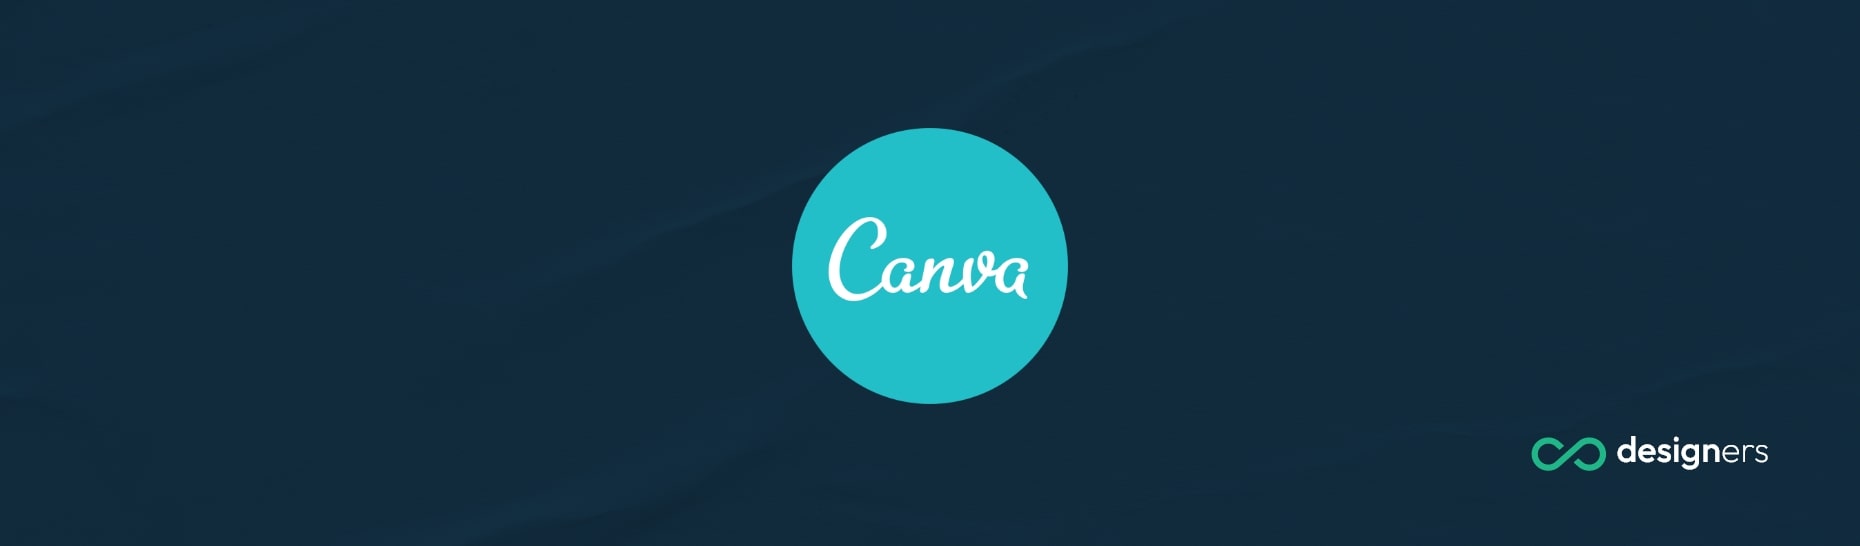 Where Is the Toolbar in Canva?